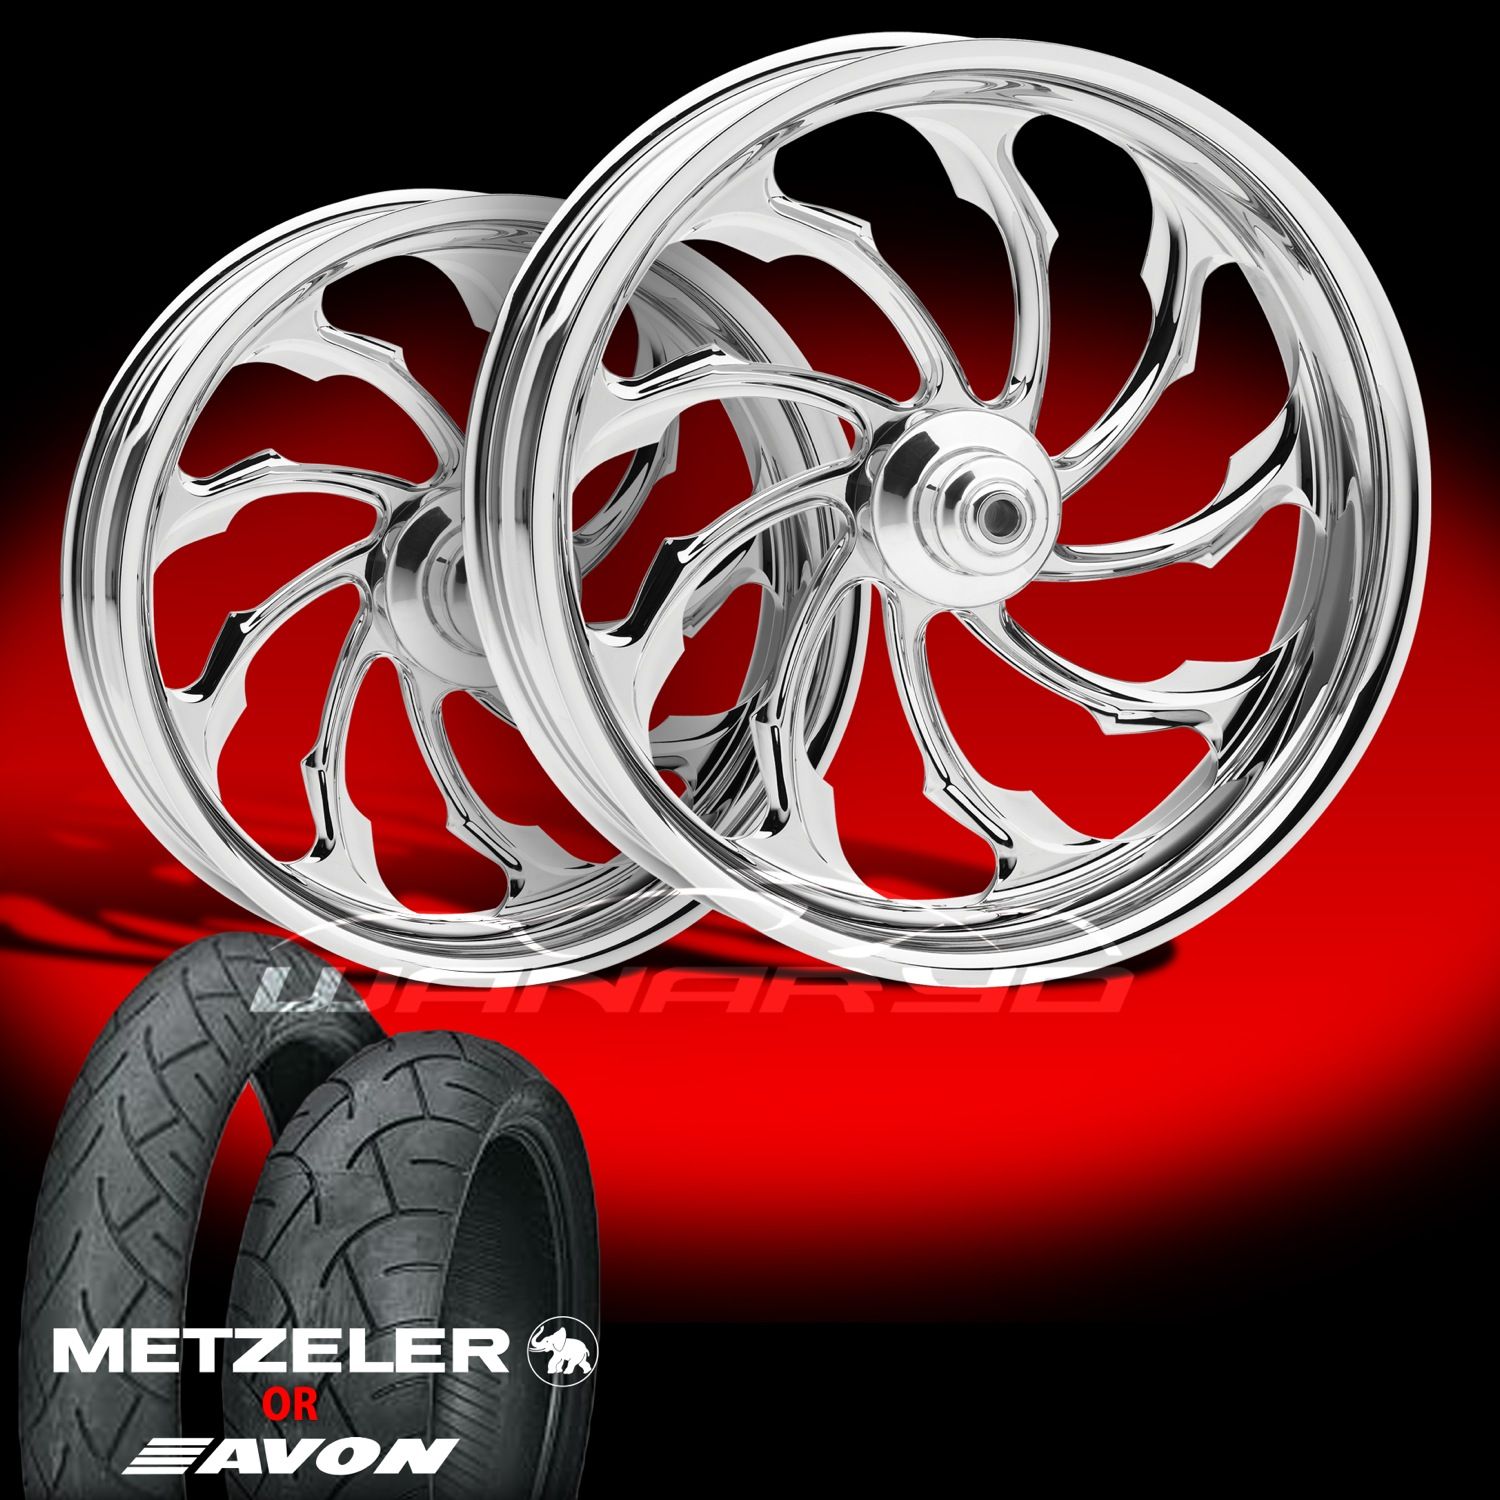 Machine Torque Chrome Wheels Tires for 2009 13 Harley Touring